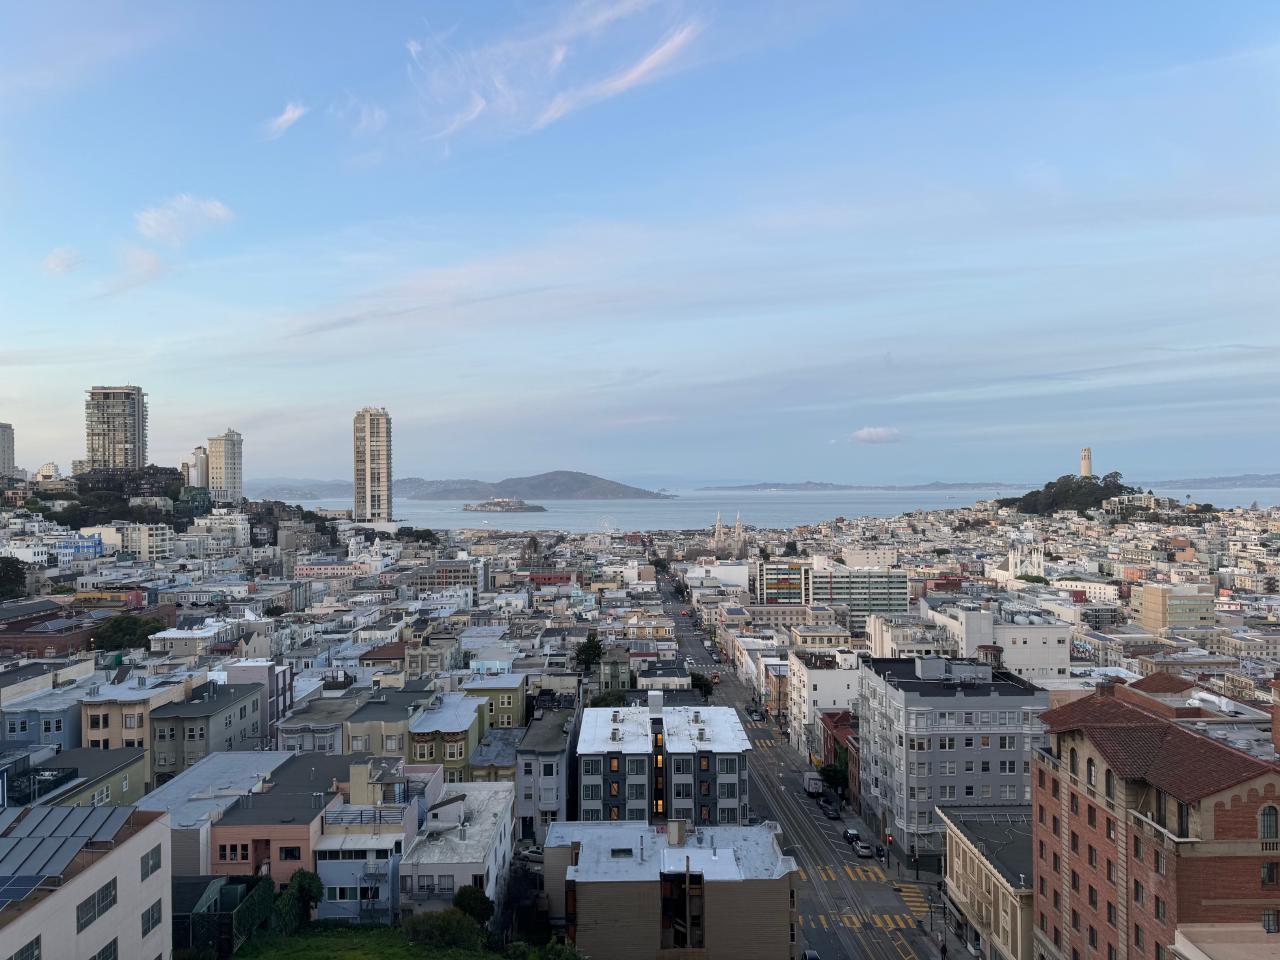  A sweeping view of San Francisco from Nob Hill on a clear day with high wispy clouds. In the center distance, Alcatraz Island rises out of the water. To the right, Coit Tower stands atop Telegraph Hill. To the left is Russian Hill, with myriad tall apartment buildings. 